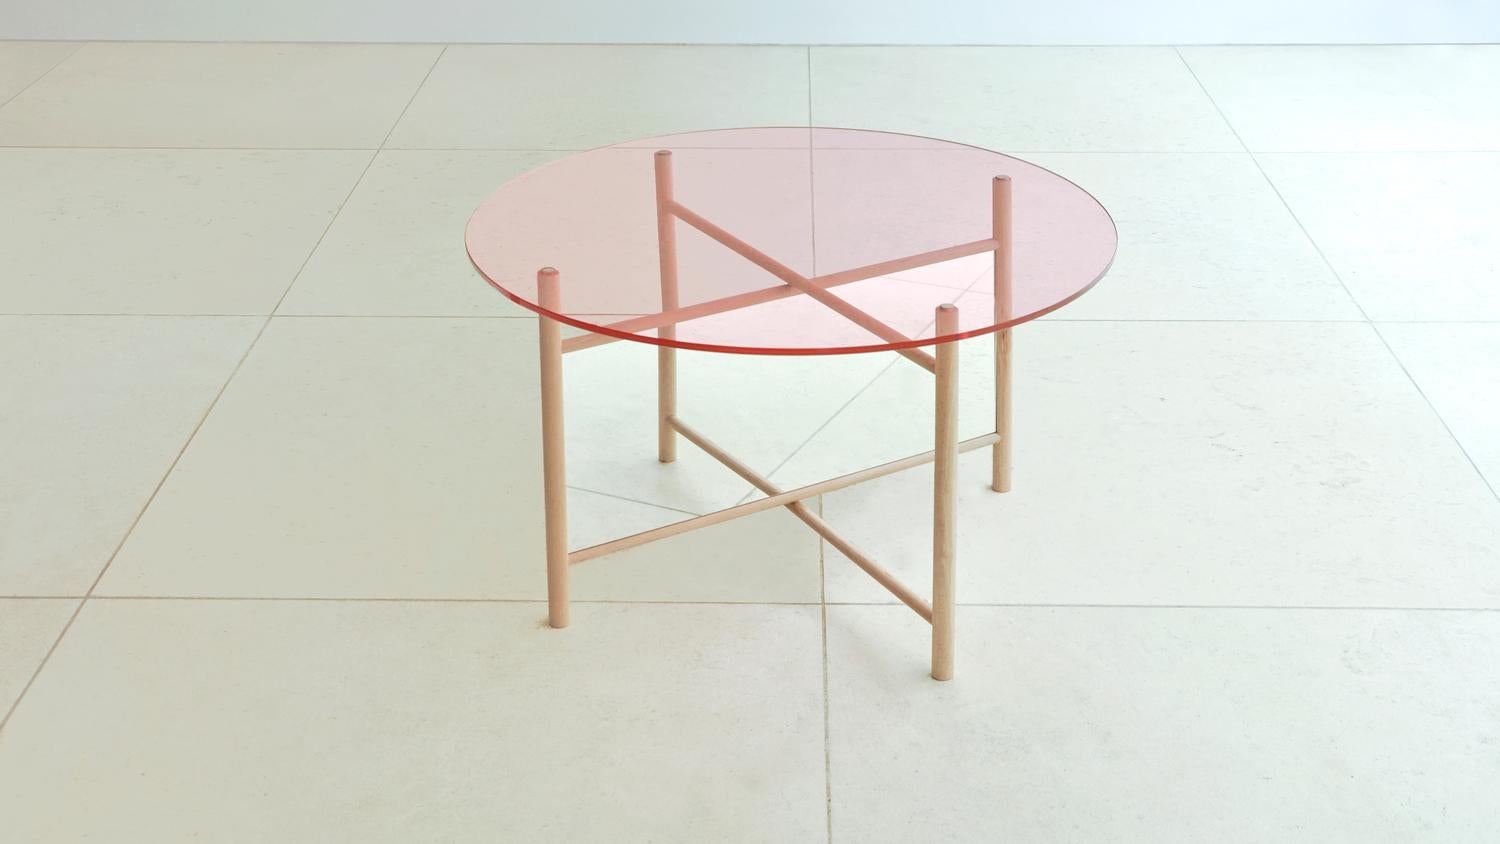 Elias side table by Llot Llov
Dimensions: Ø 80 x H: 50
Materials: beech, mirror, glass


With OSIS Edition 5 LLOT LLOV is deepening the understanding of the impact of salt and pigment. Colour and surface patterns enter into a kind of dialogue with